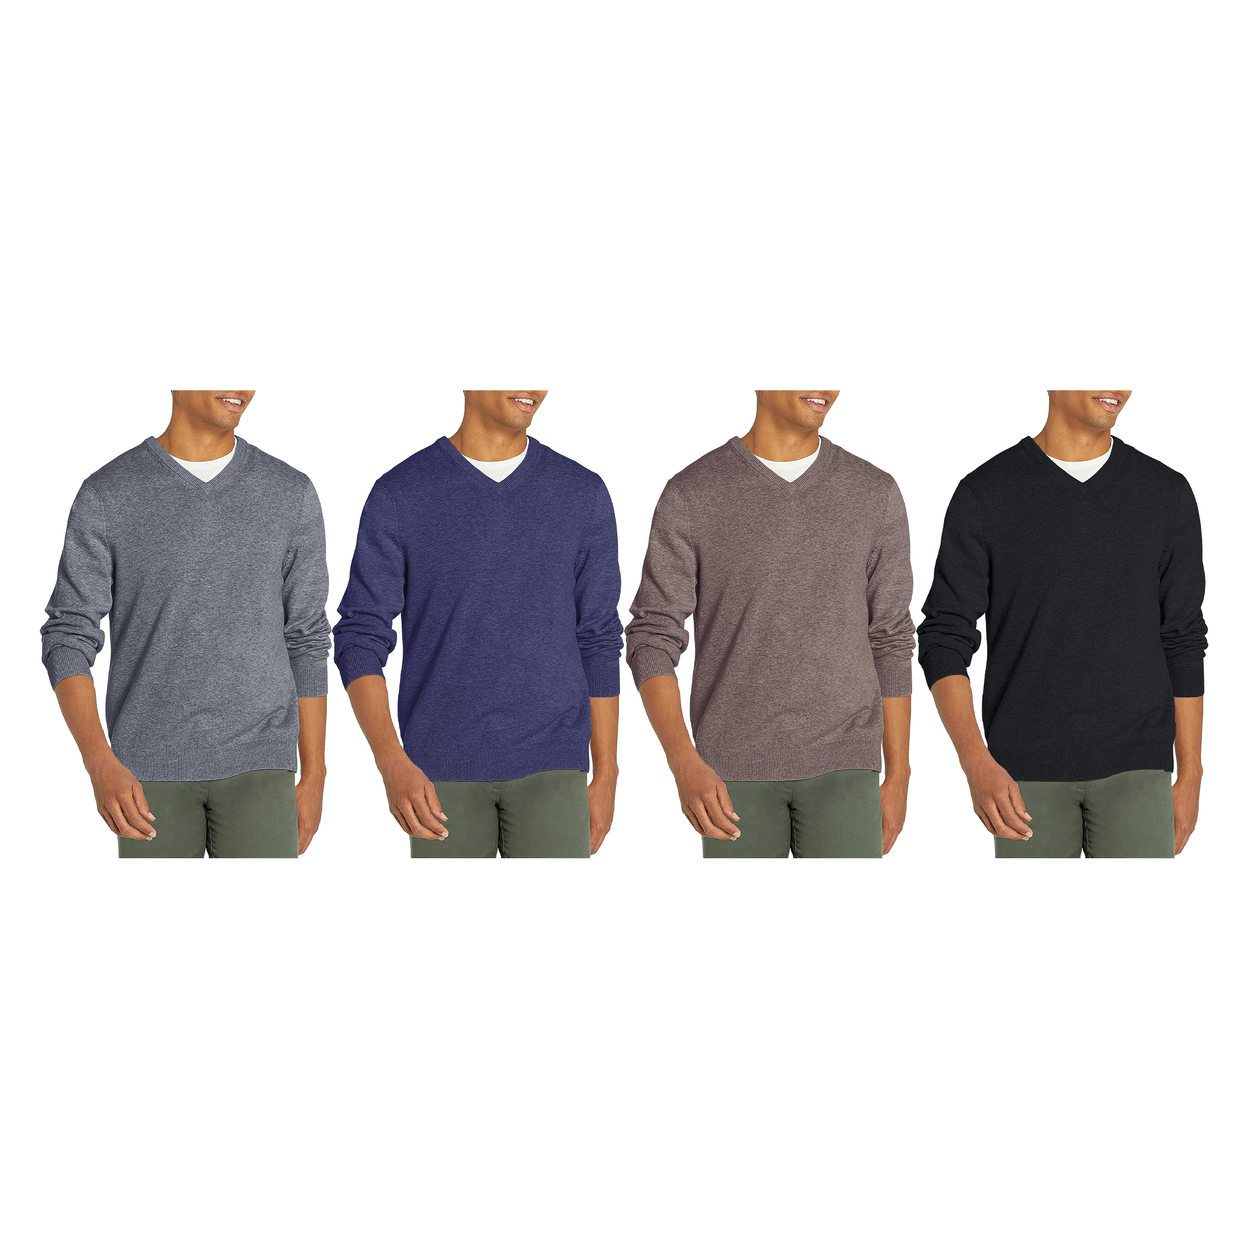 Multi-Pack: Men's Casual Ultra Soft Slim Fit Warm Knit V-Neck Sweater - 1-pack, Large